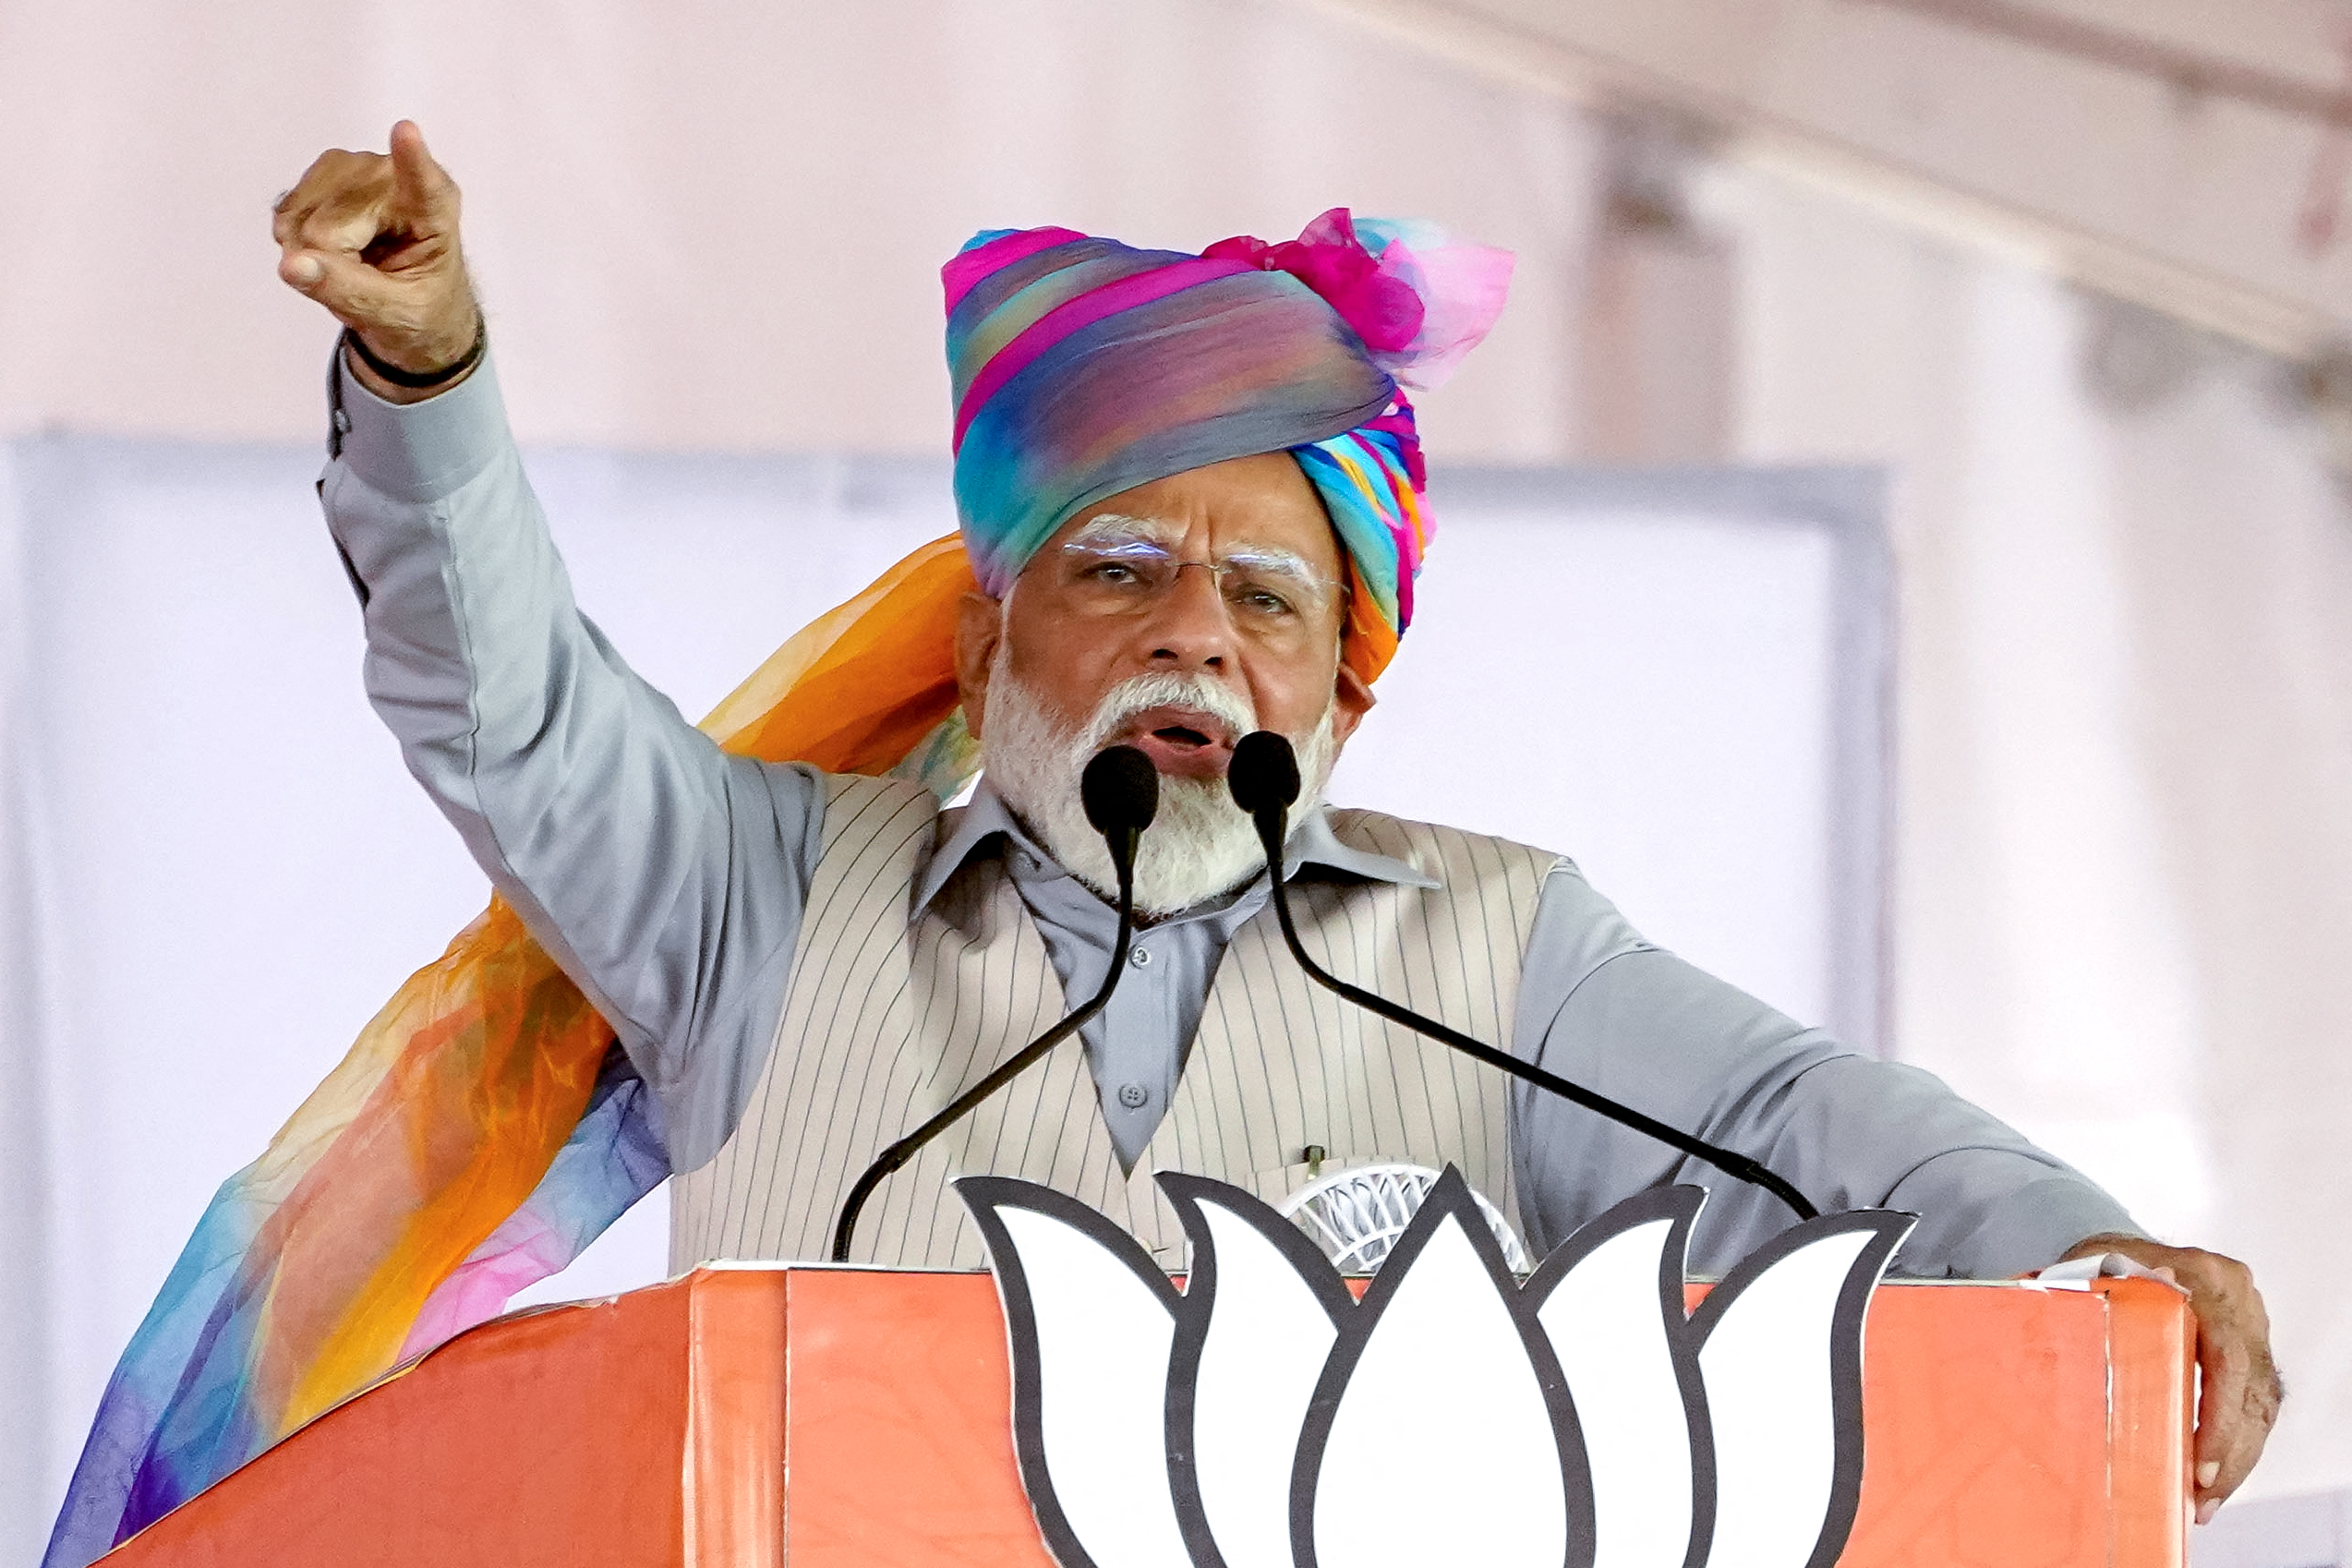 Why Modi dominates his opponents in Indian elections